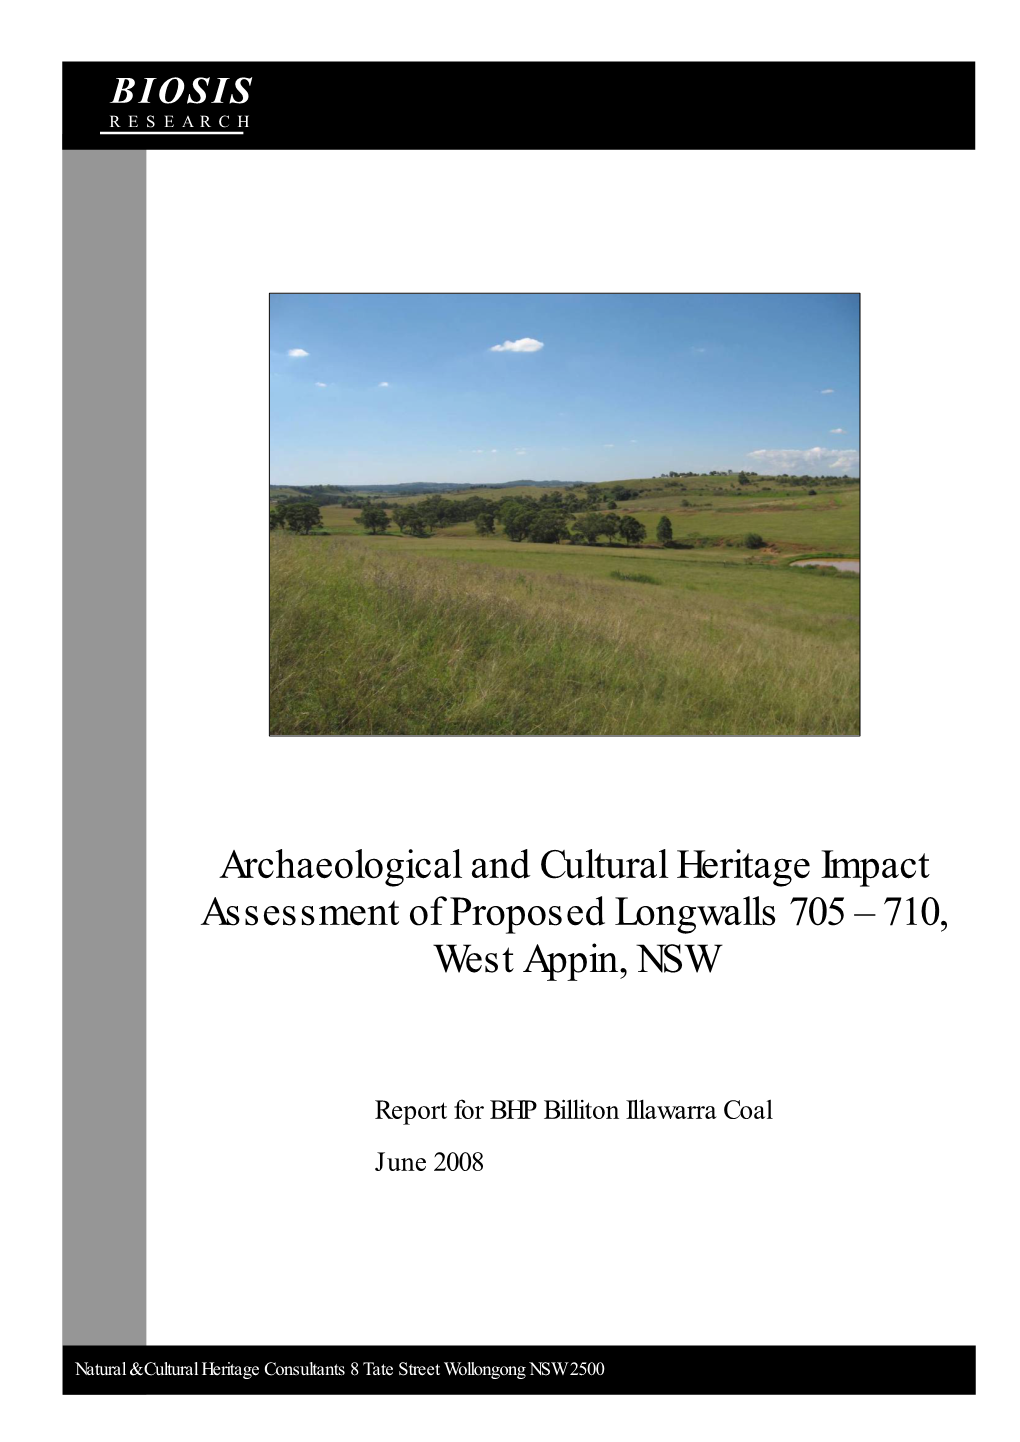 Archaeological and Cultural Heritage Impact Assessment of Proposed Longwalls 705 – 710, West Appin, NSW